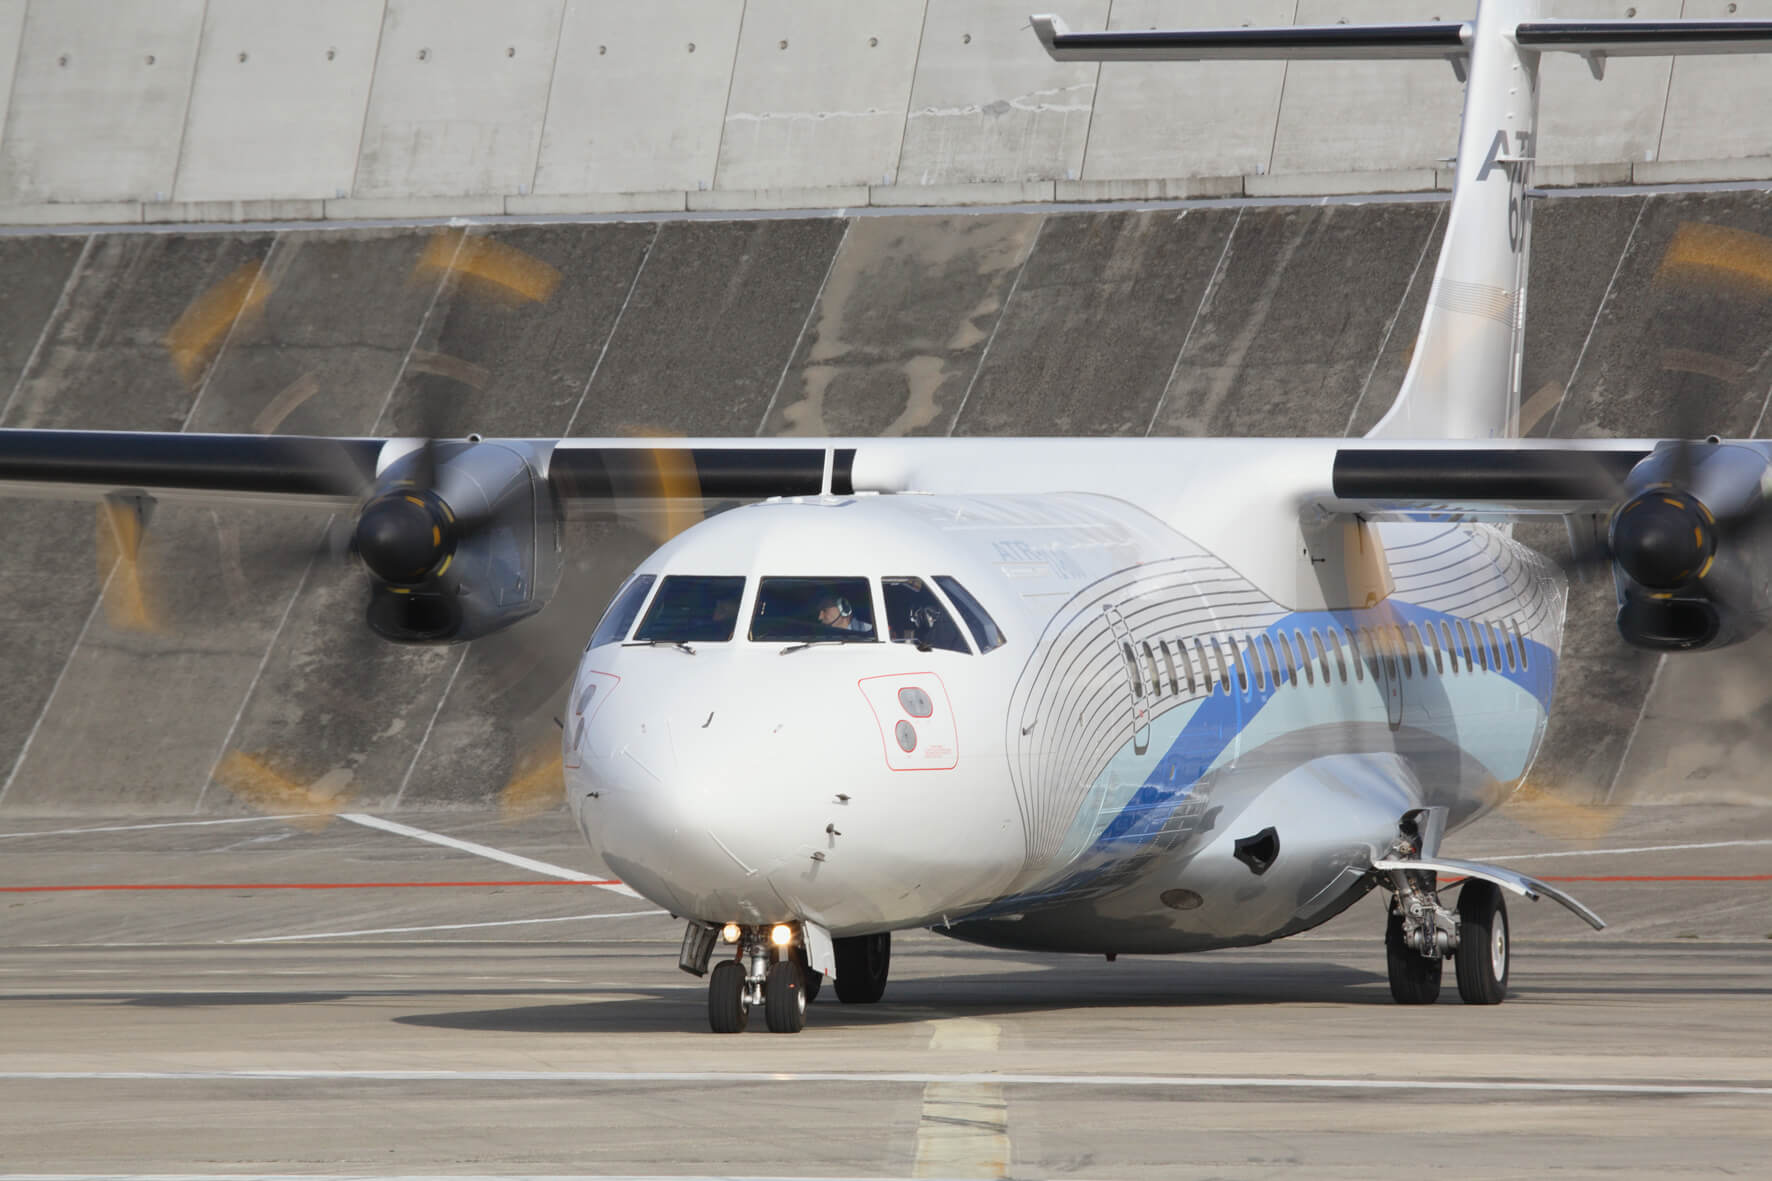 NAC delivers one new ATR 72-600 to AirSWIFT on lease